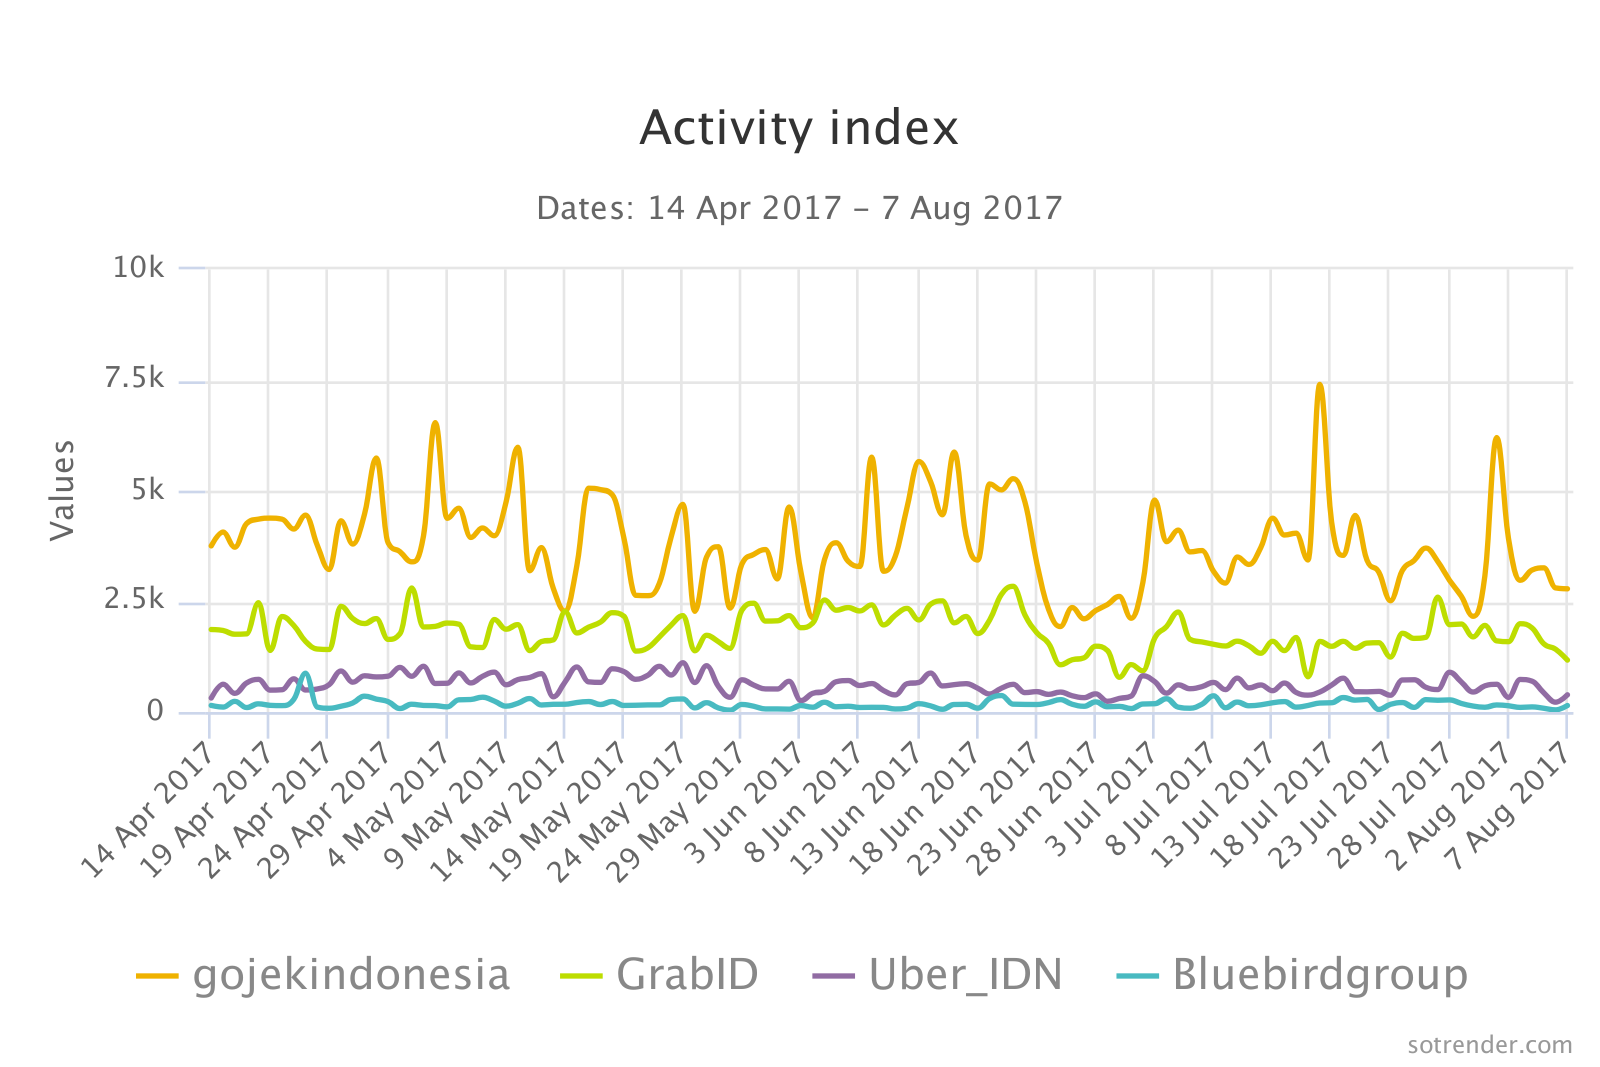 Ride Sharing Apps in Indonesia - Twitter Daily Activity Index